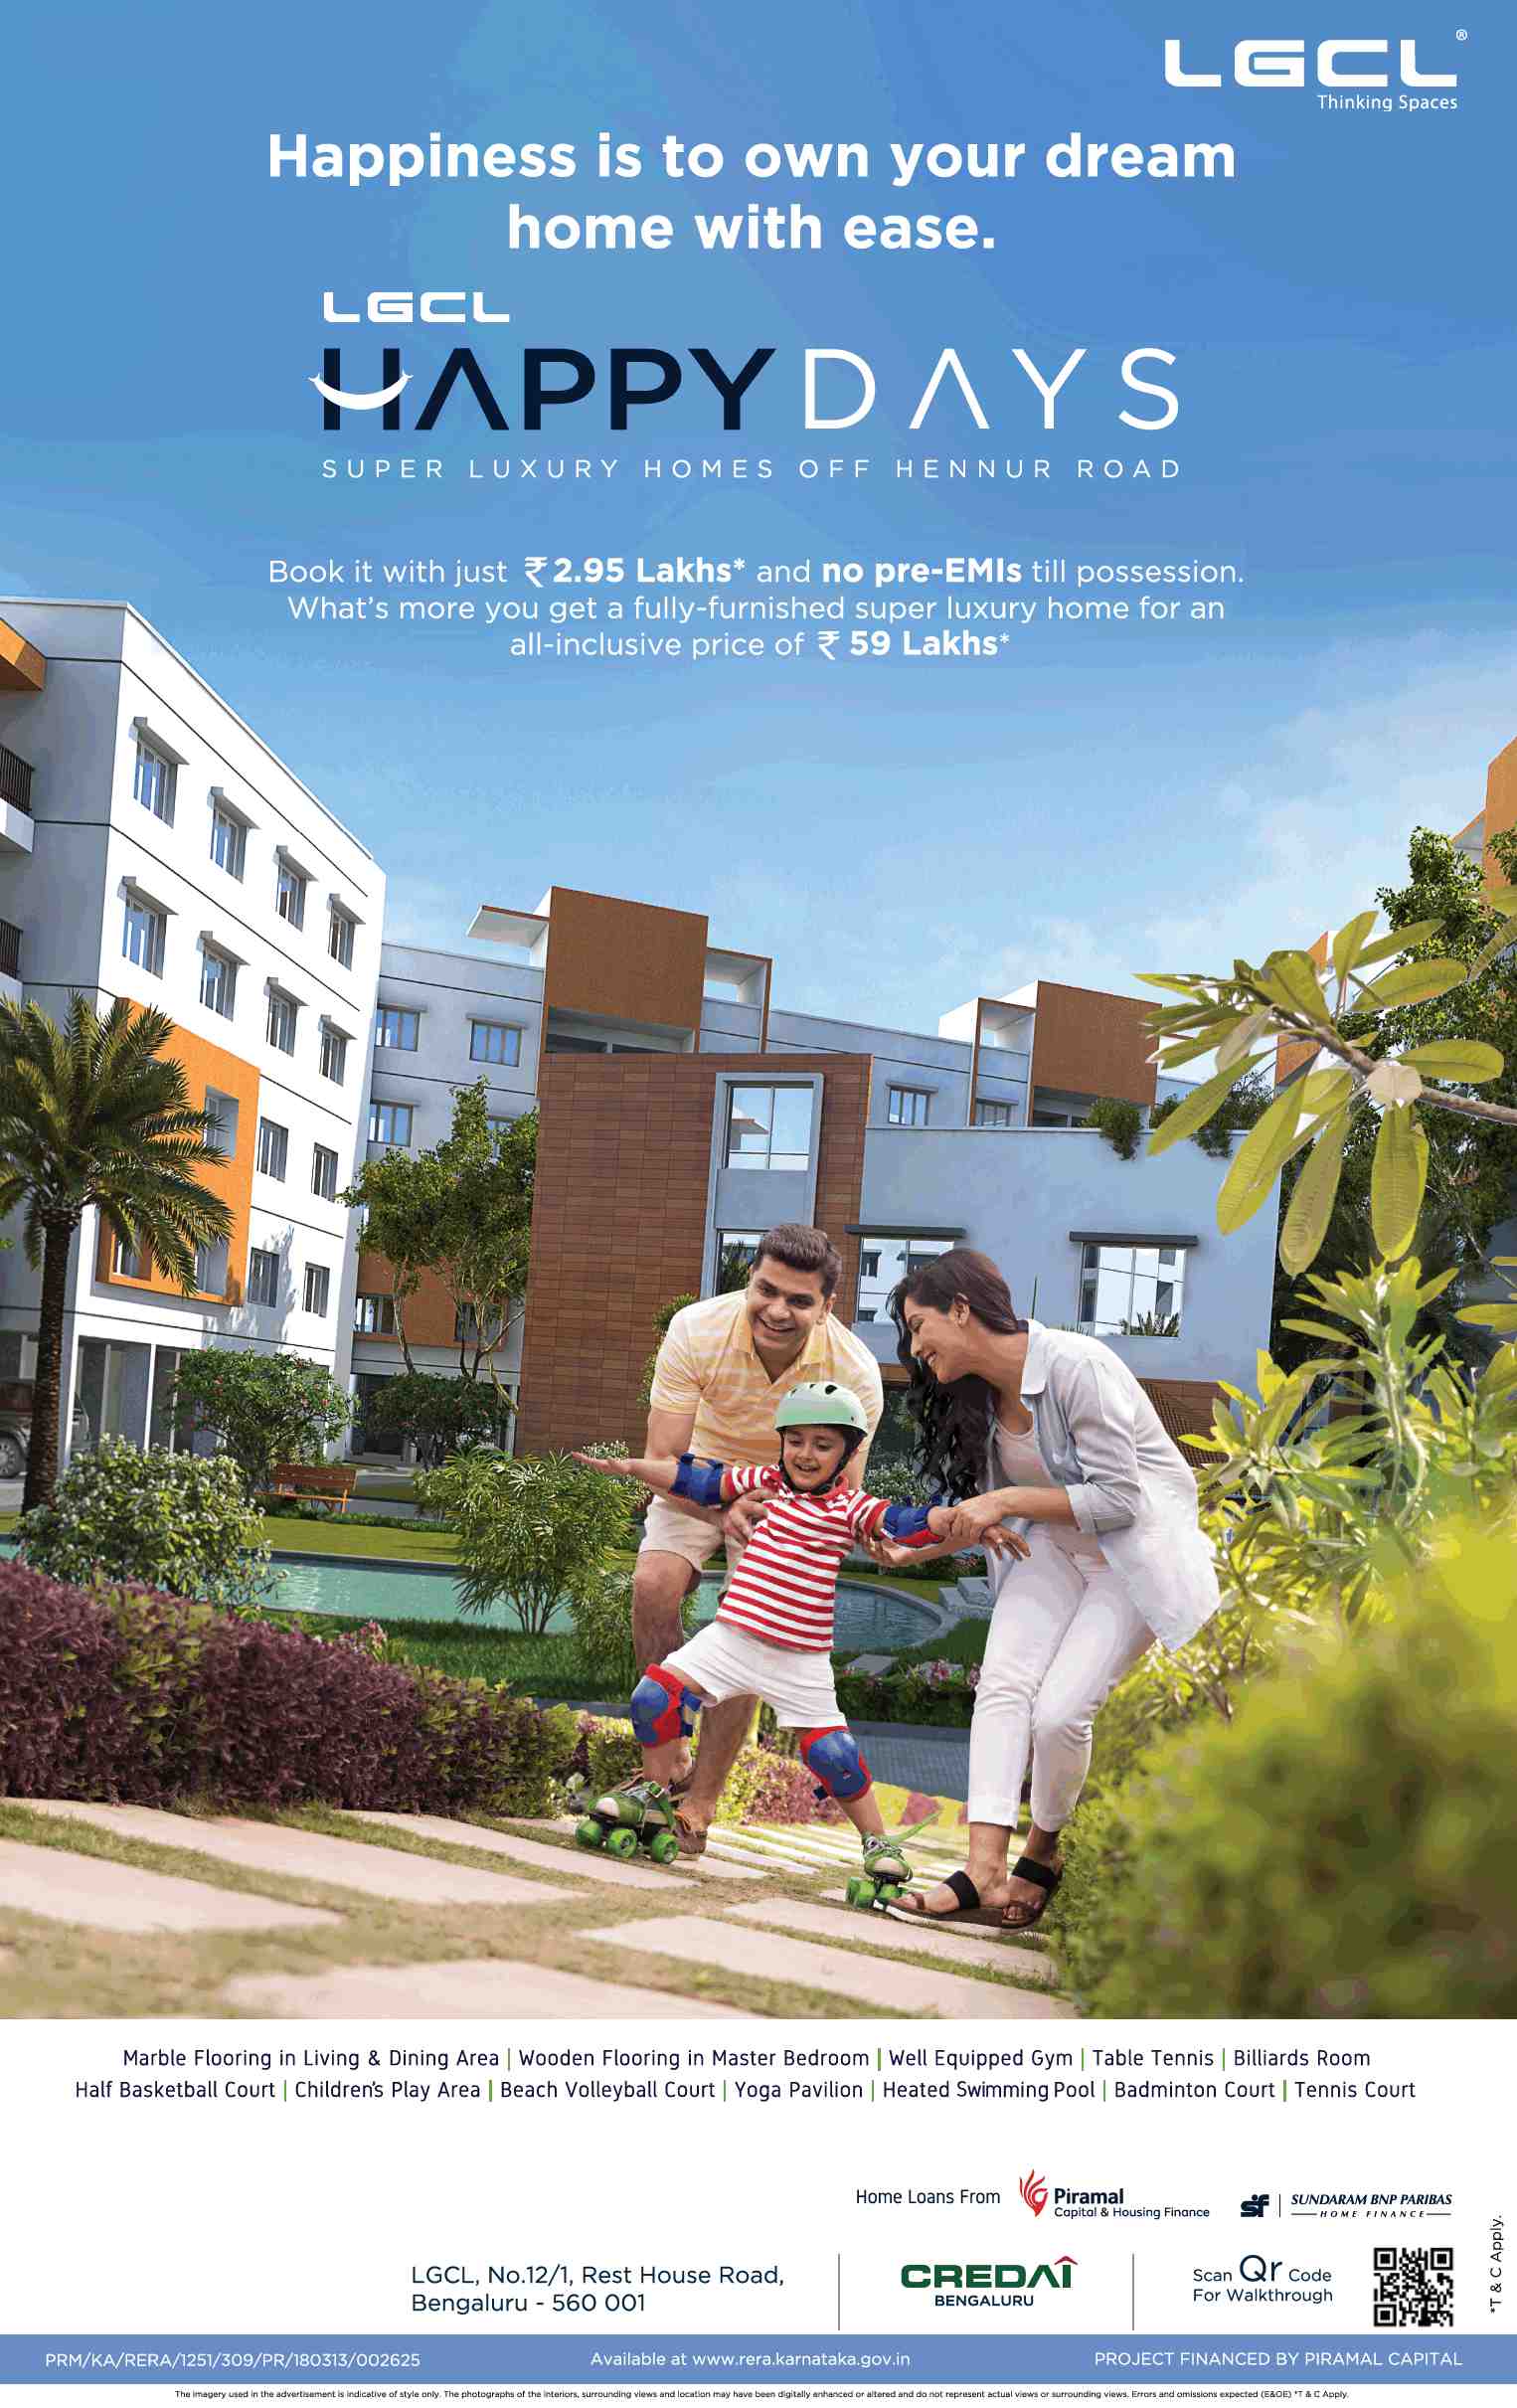 Get a fully furnished super luxury home @ Rs 59 Lakhs at LGCL Happy Days in Visthar, Bangalore